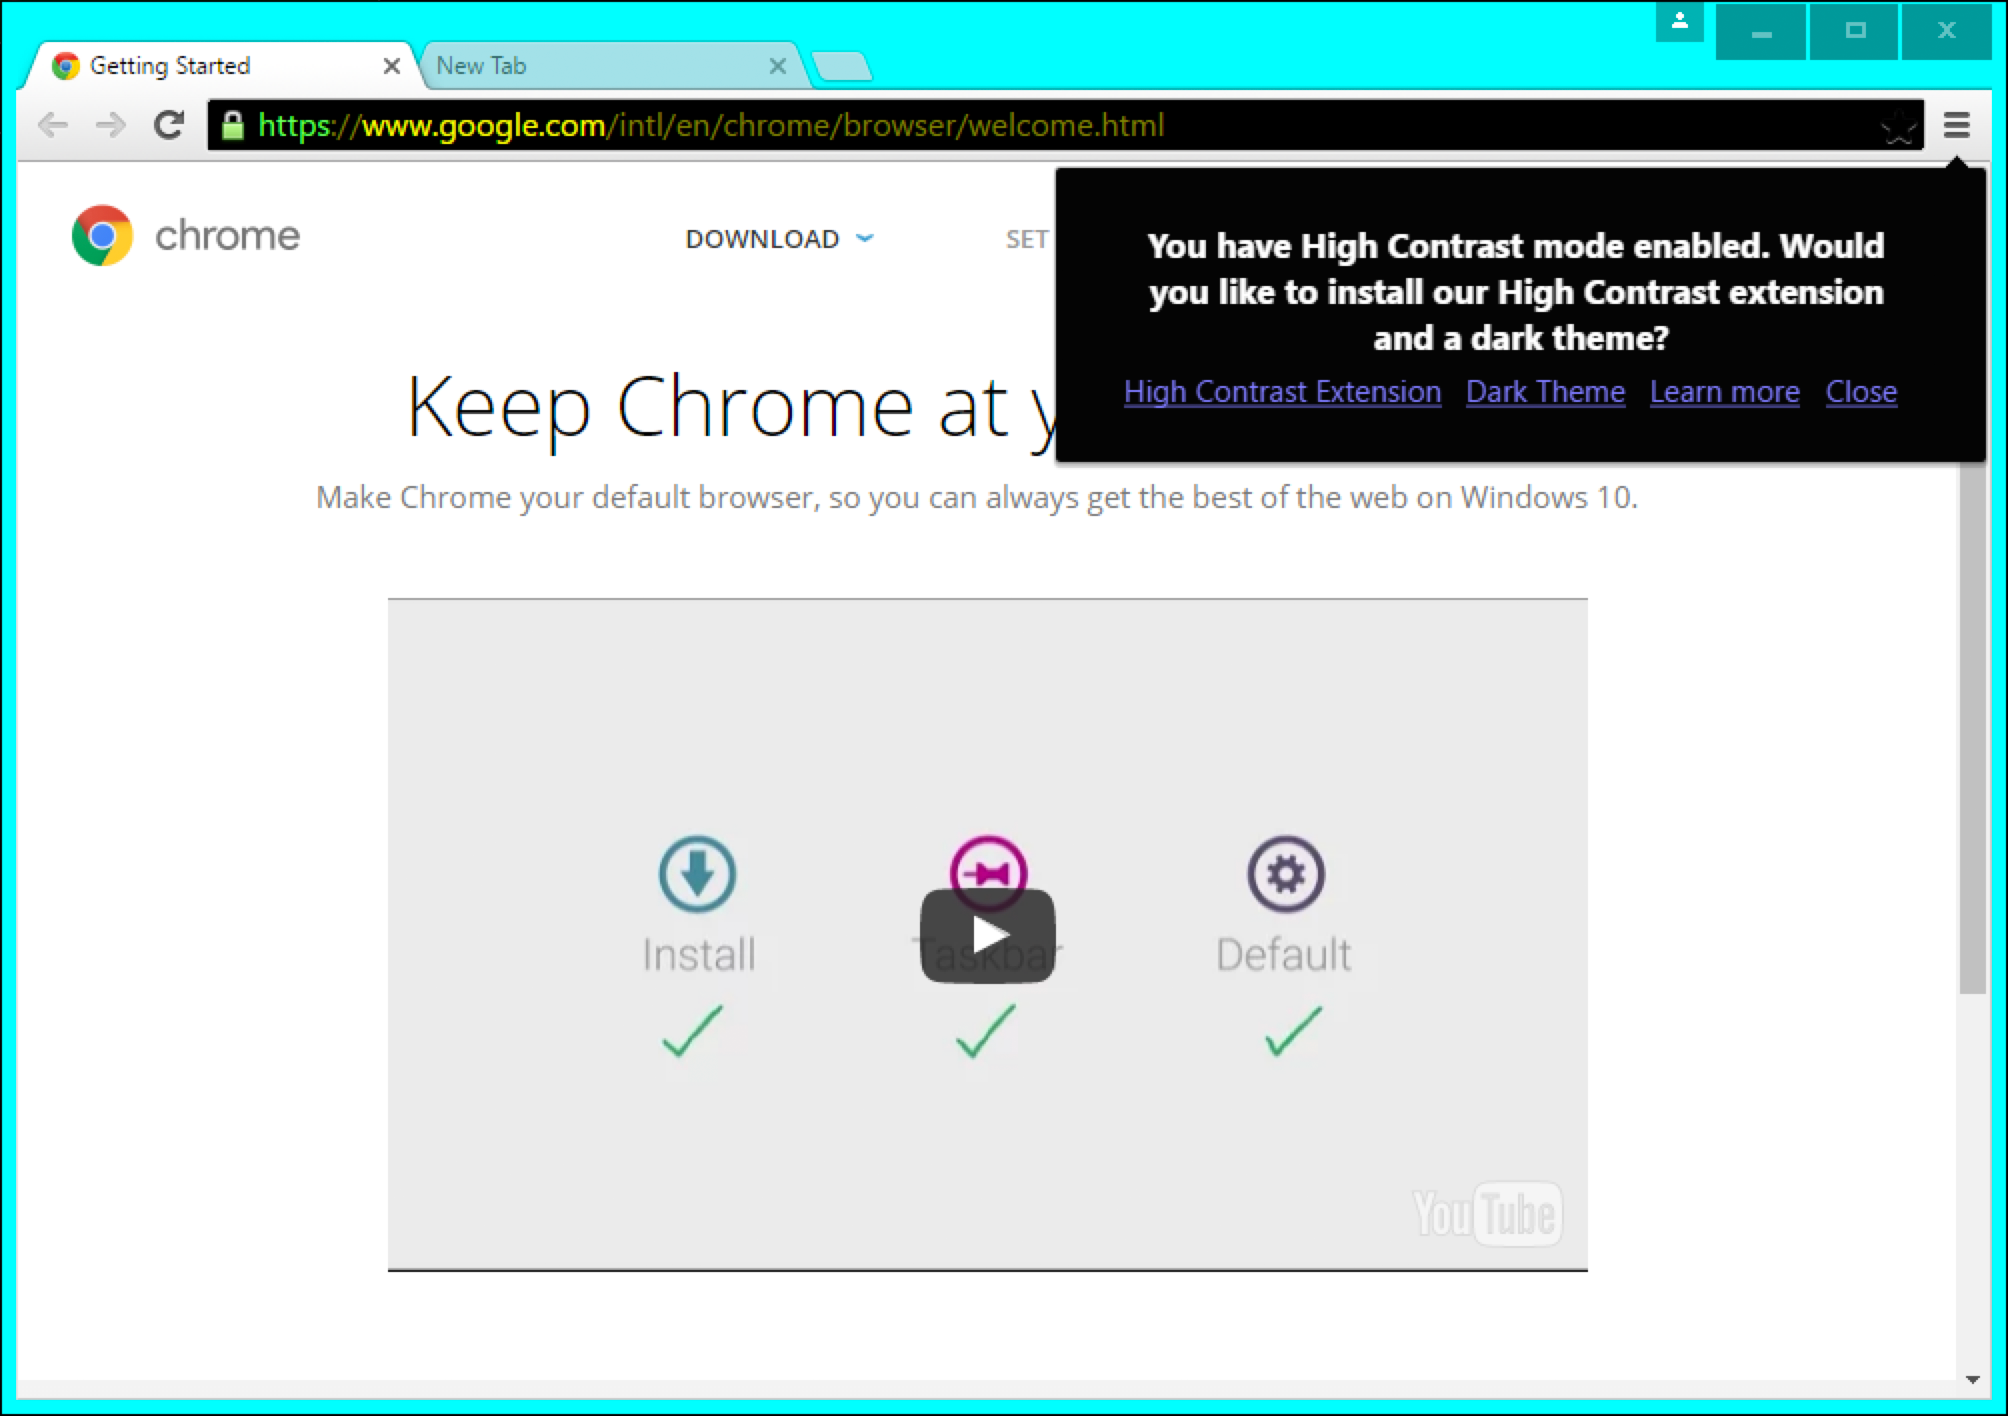 Screenshot of Chrome prompting the user to install a high contrast extension when High Contrast Mode is enabled.